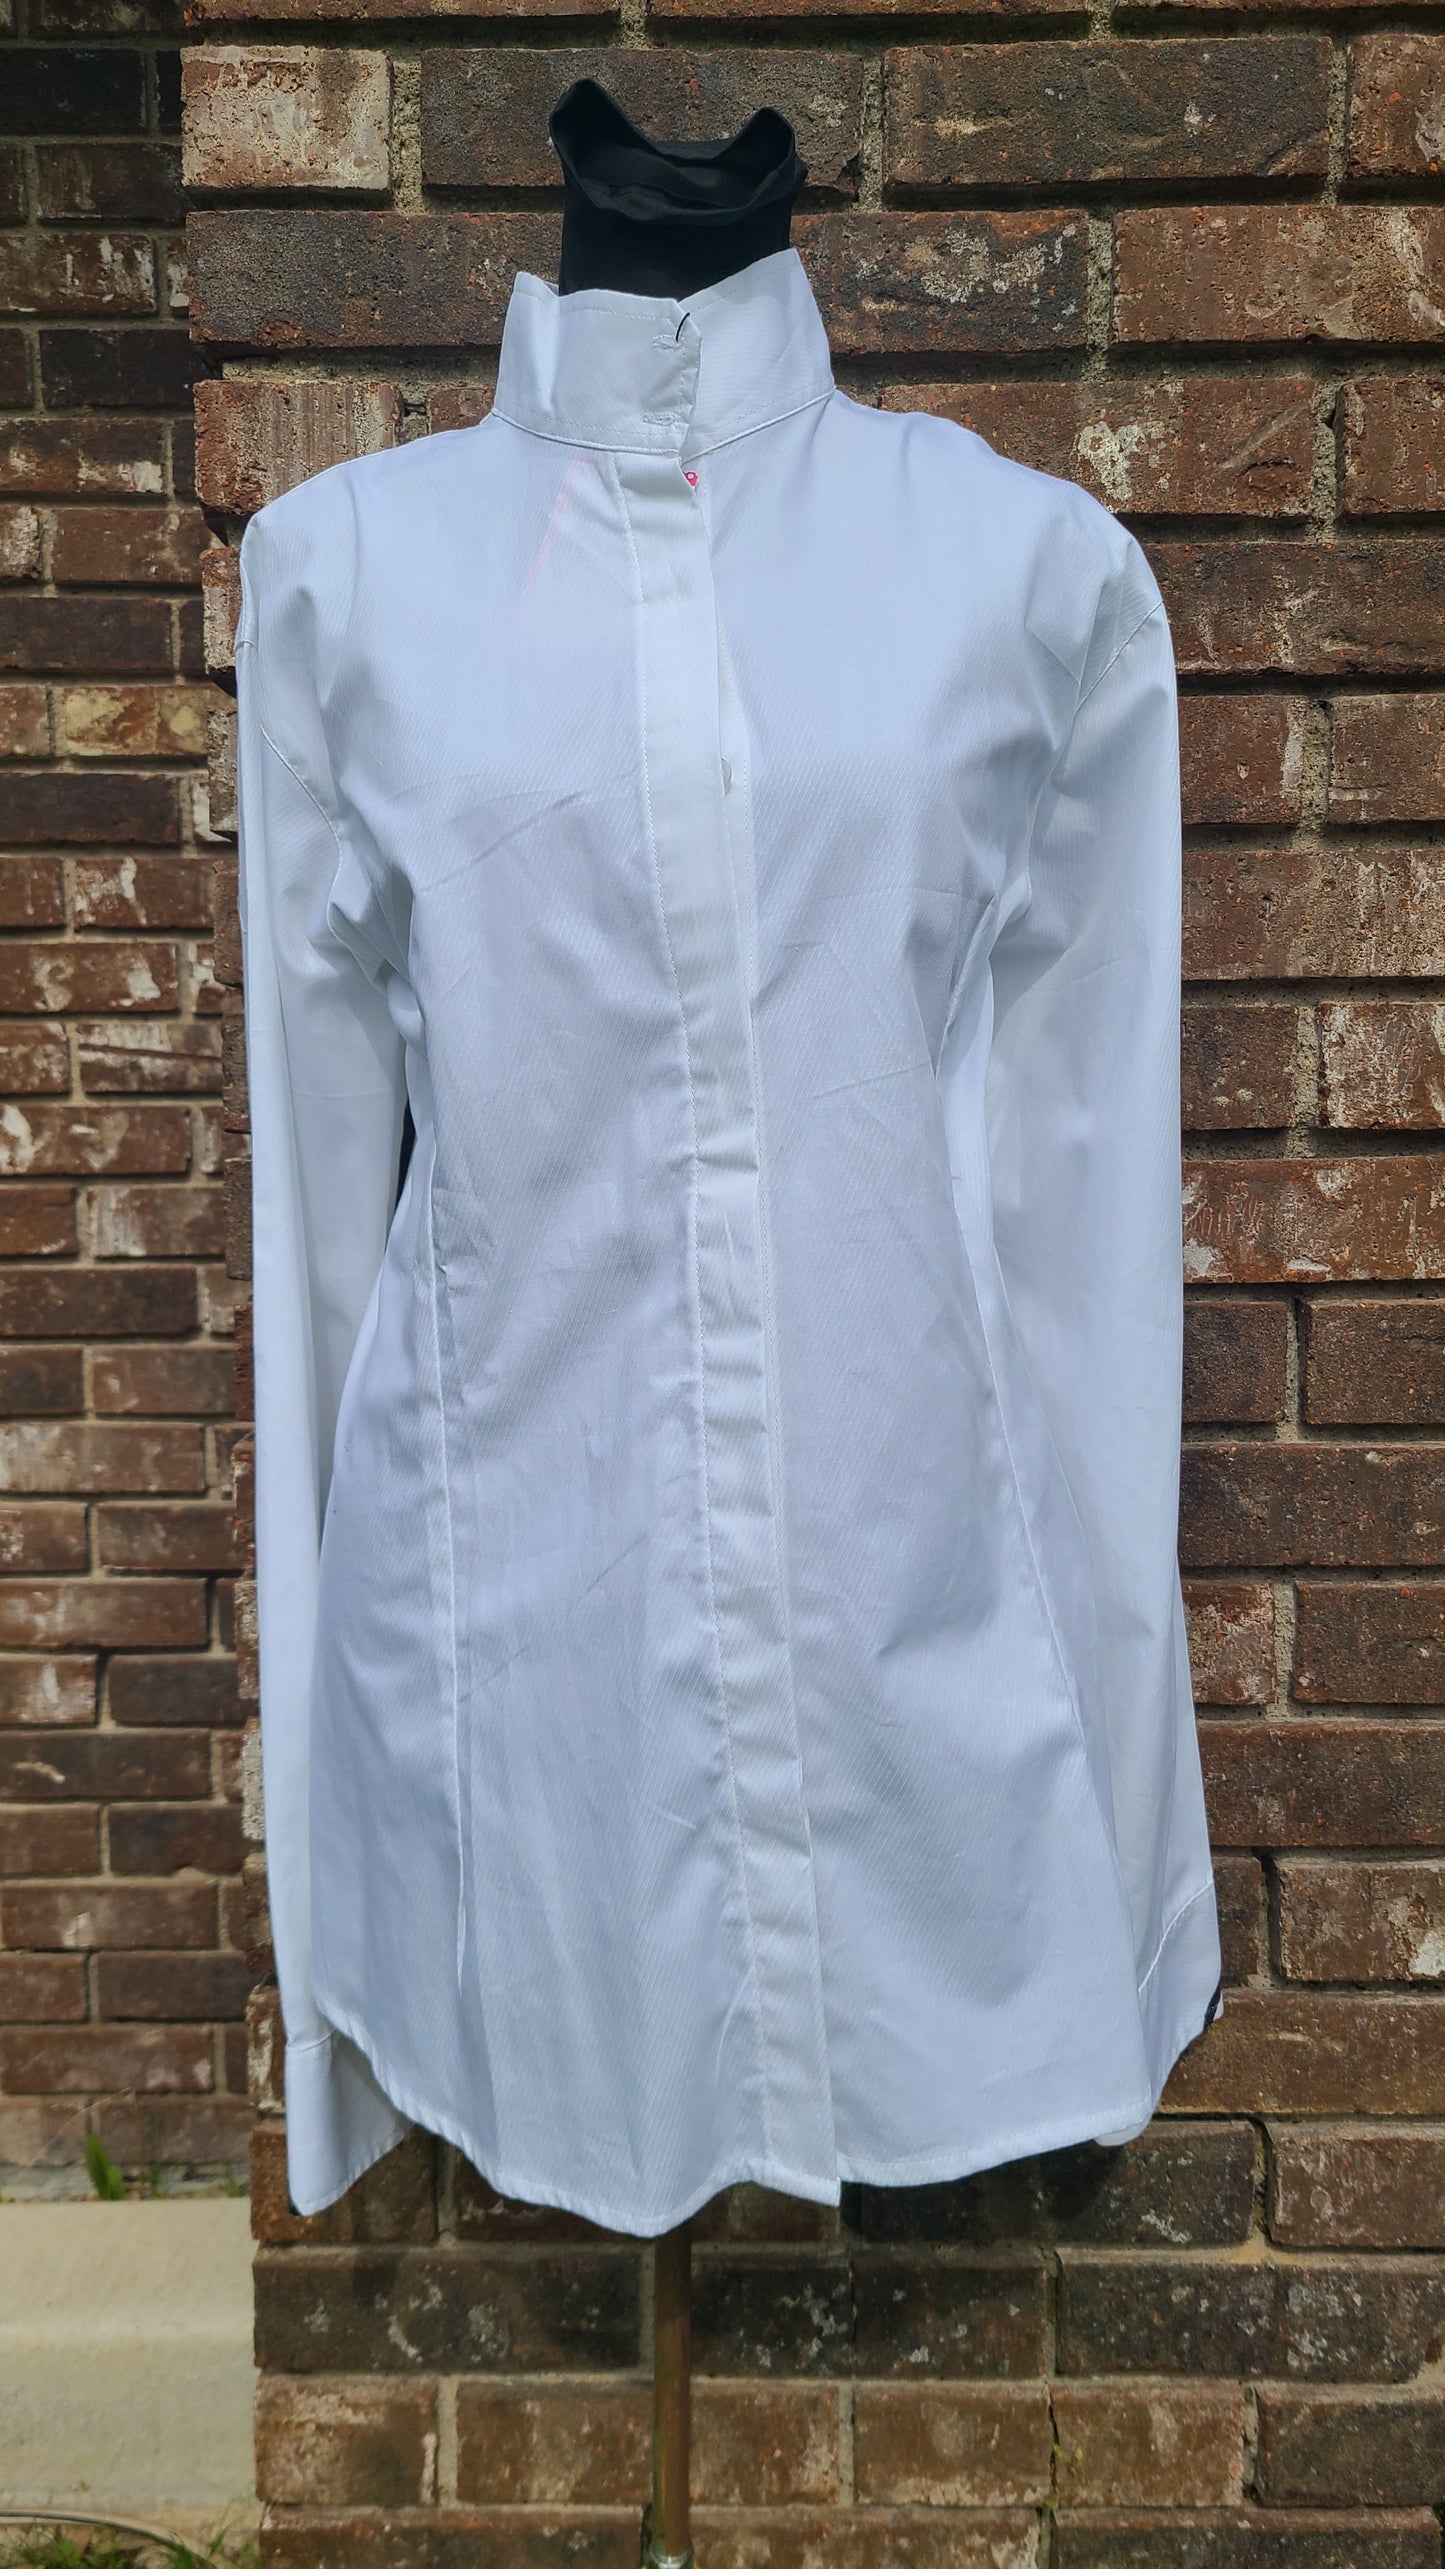 #U90 English Shirt White with Navy and Copper